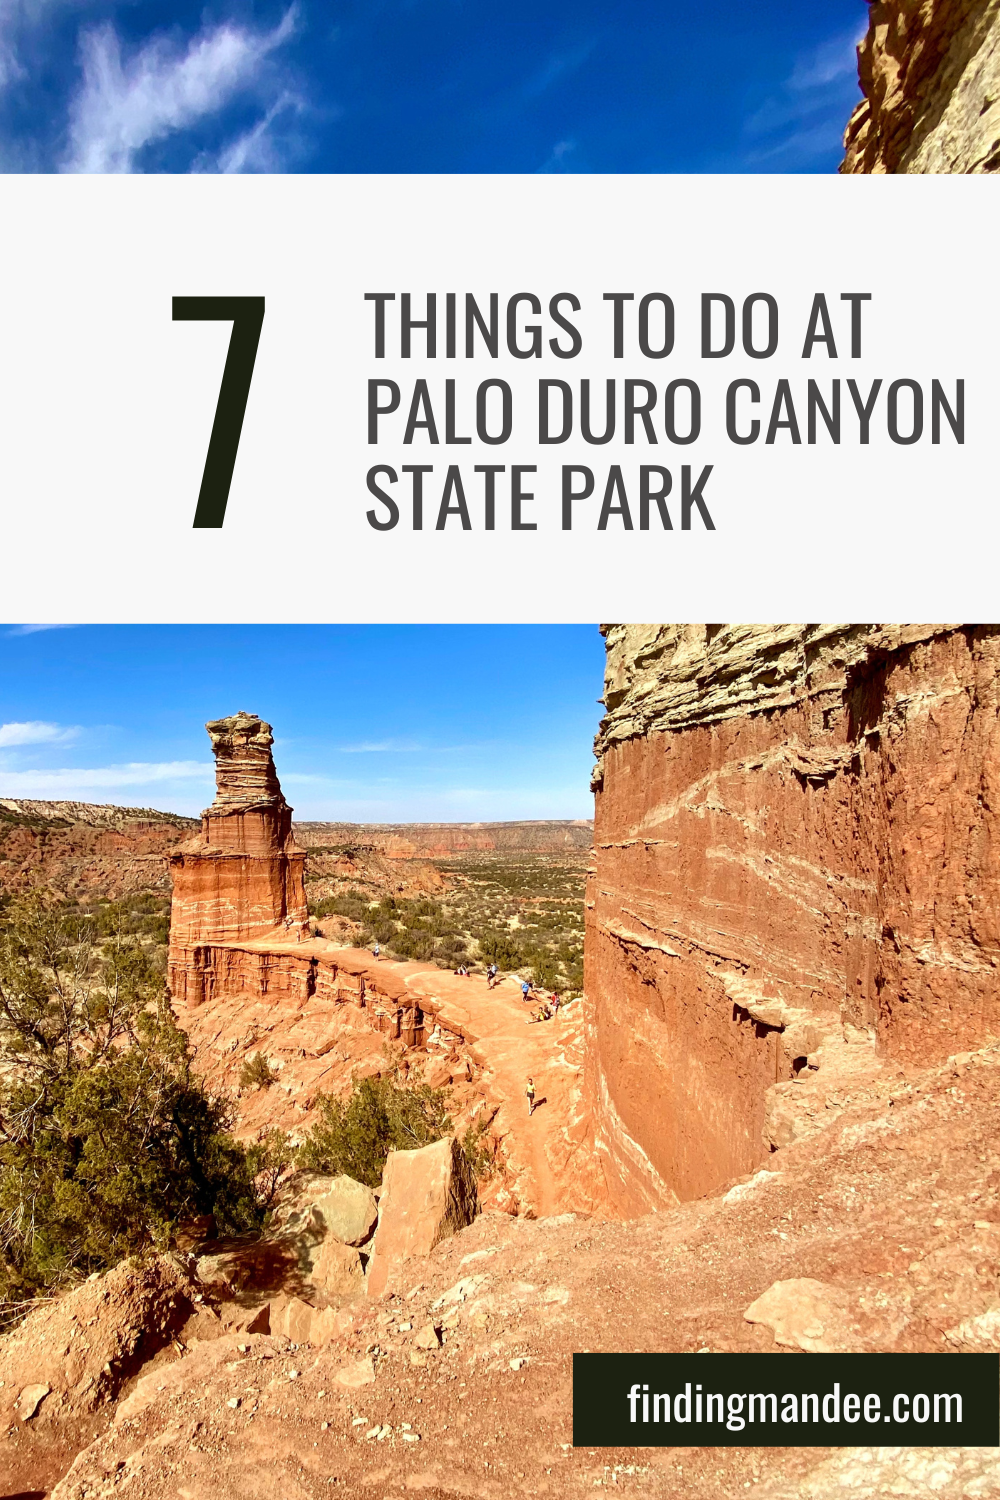 7 Things to do at Palo Duro Canyon State Park in Texas | Finding Mandee